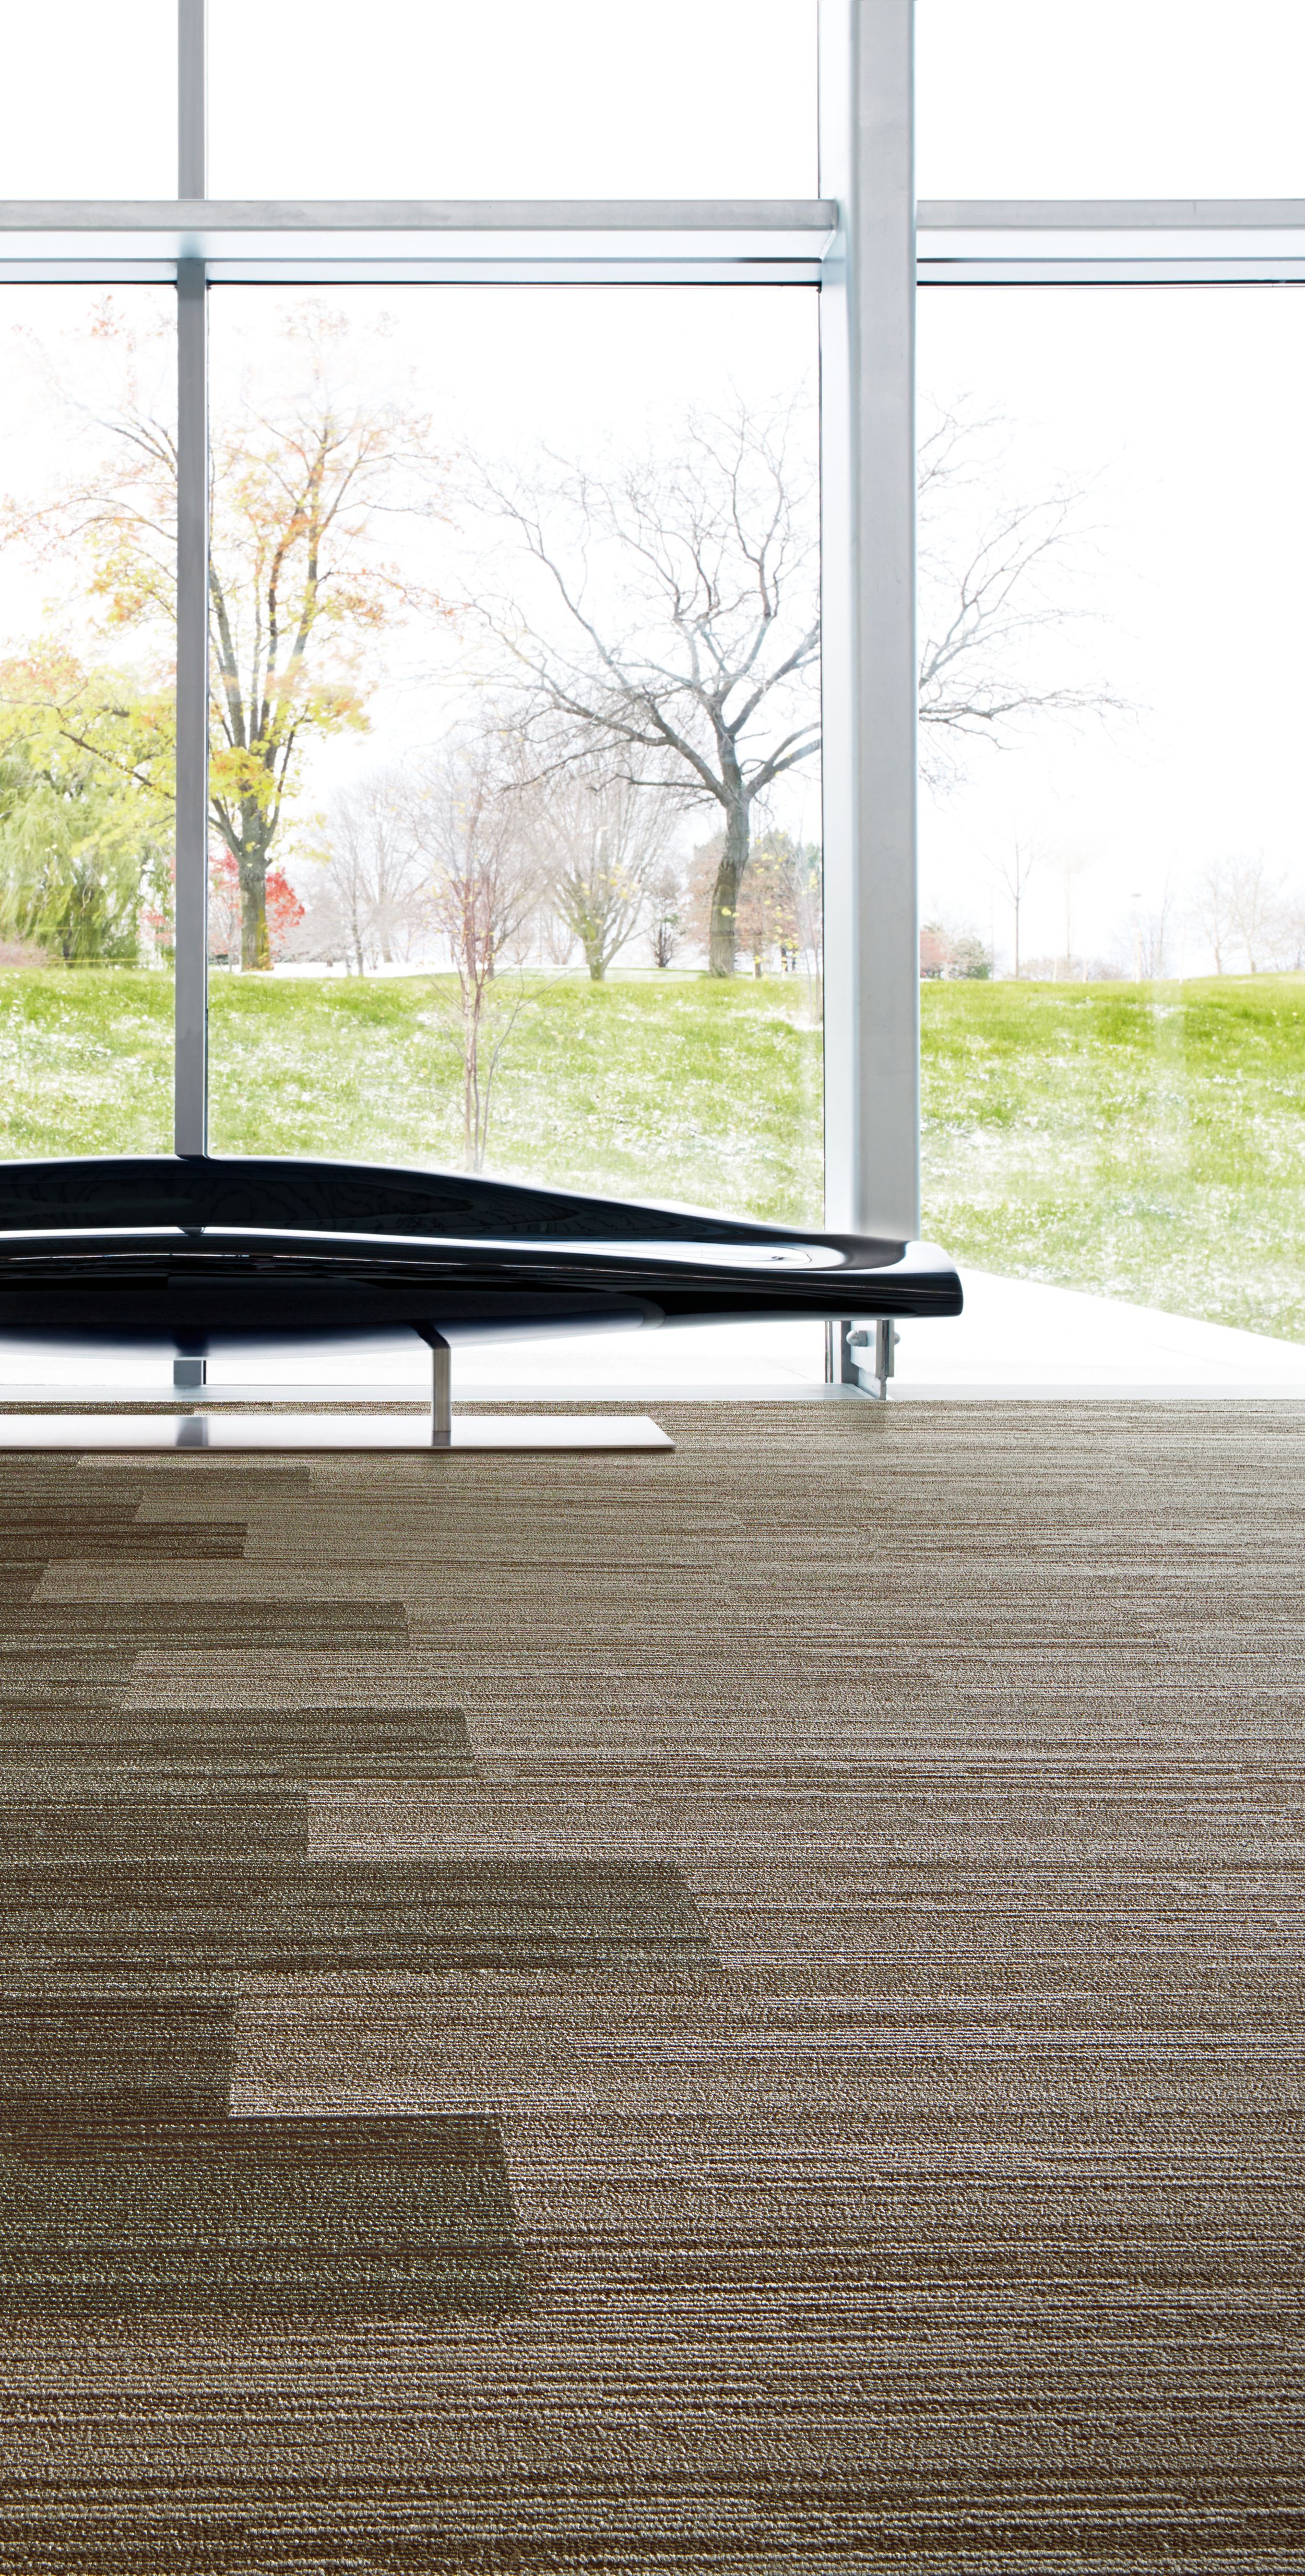 Interface Progression III plank carpet tile in room with seating area by window numéro d’image 5